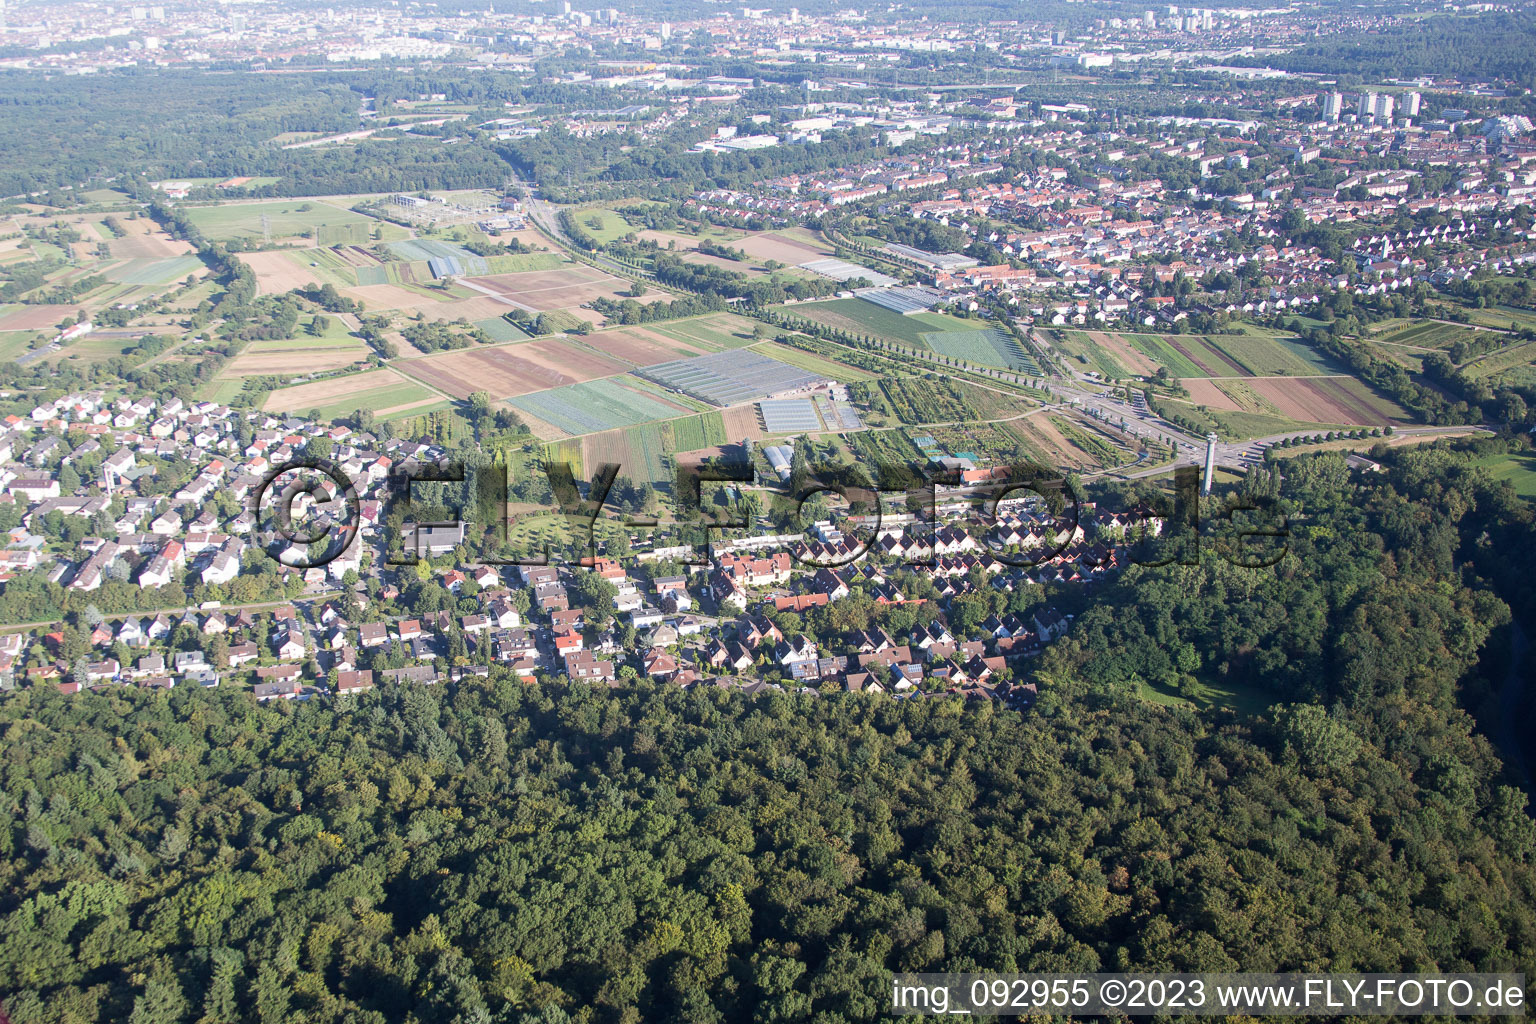 Aerial photograpy of District Wolfartsweier in Karlsruhe in the state Baden-Wuerttemberg, Germany